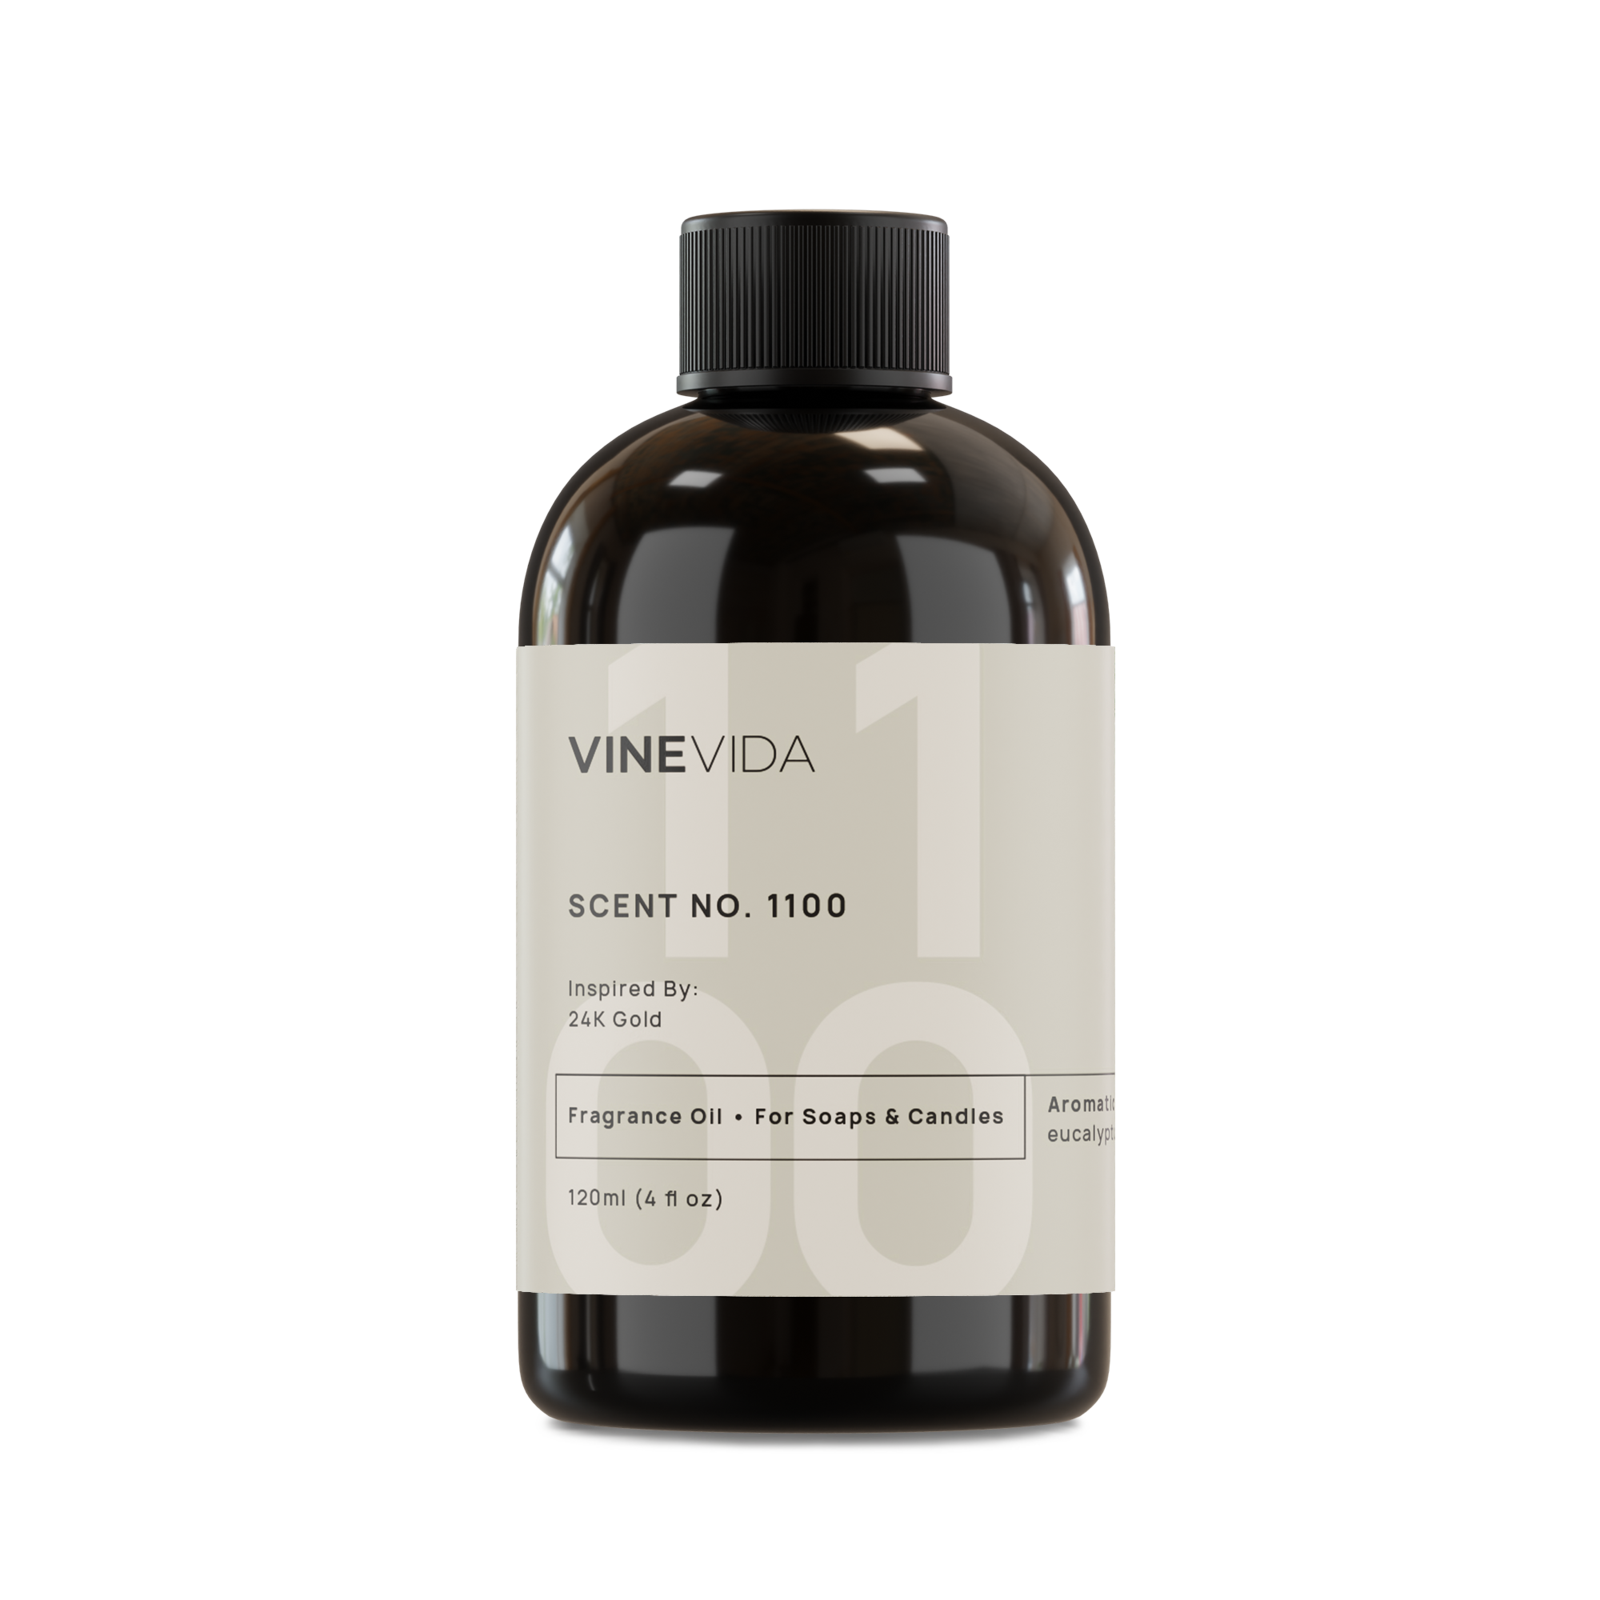 VINEVIDA: 10% OFF of October's Essential Oil of the Month!